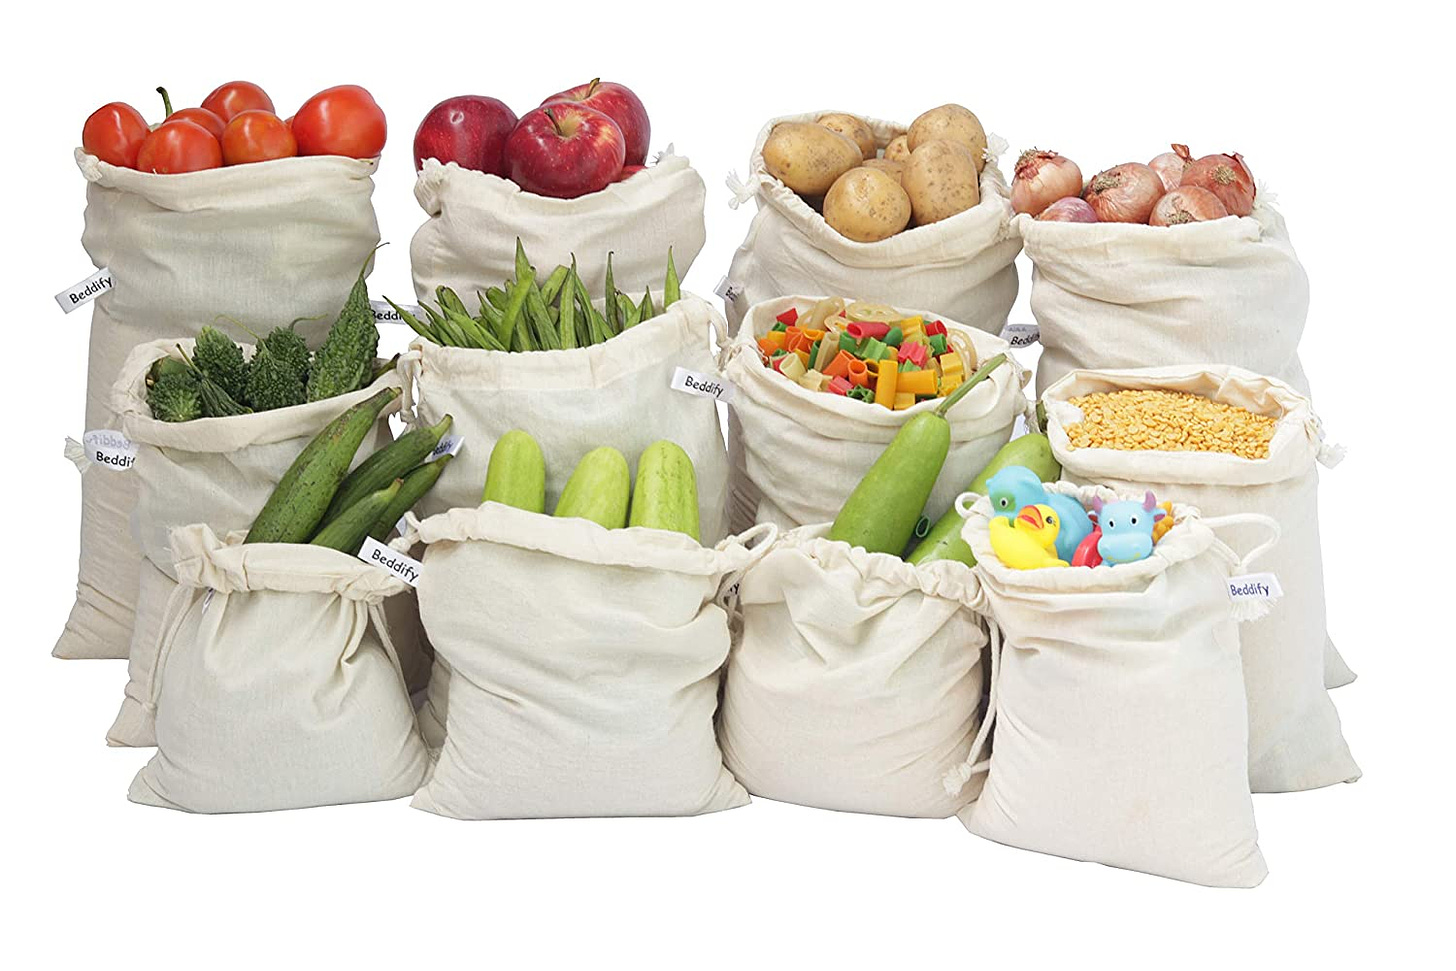 Buy Beddify 100% Cotton Set of 12 Reusable Fridge Storage Bags for  Vegetables and Fruits Premium Quality Multipurpose Eco Friendly Bags (4  Large, 4 Medium & 4 Small Size Bags) Online at